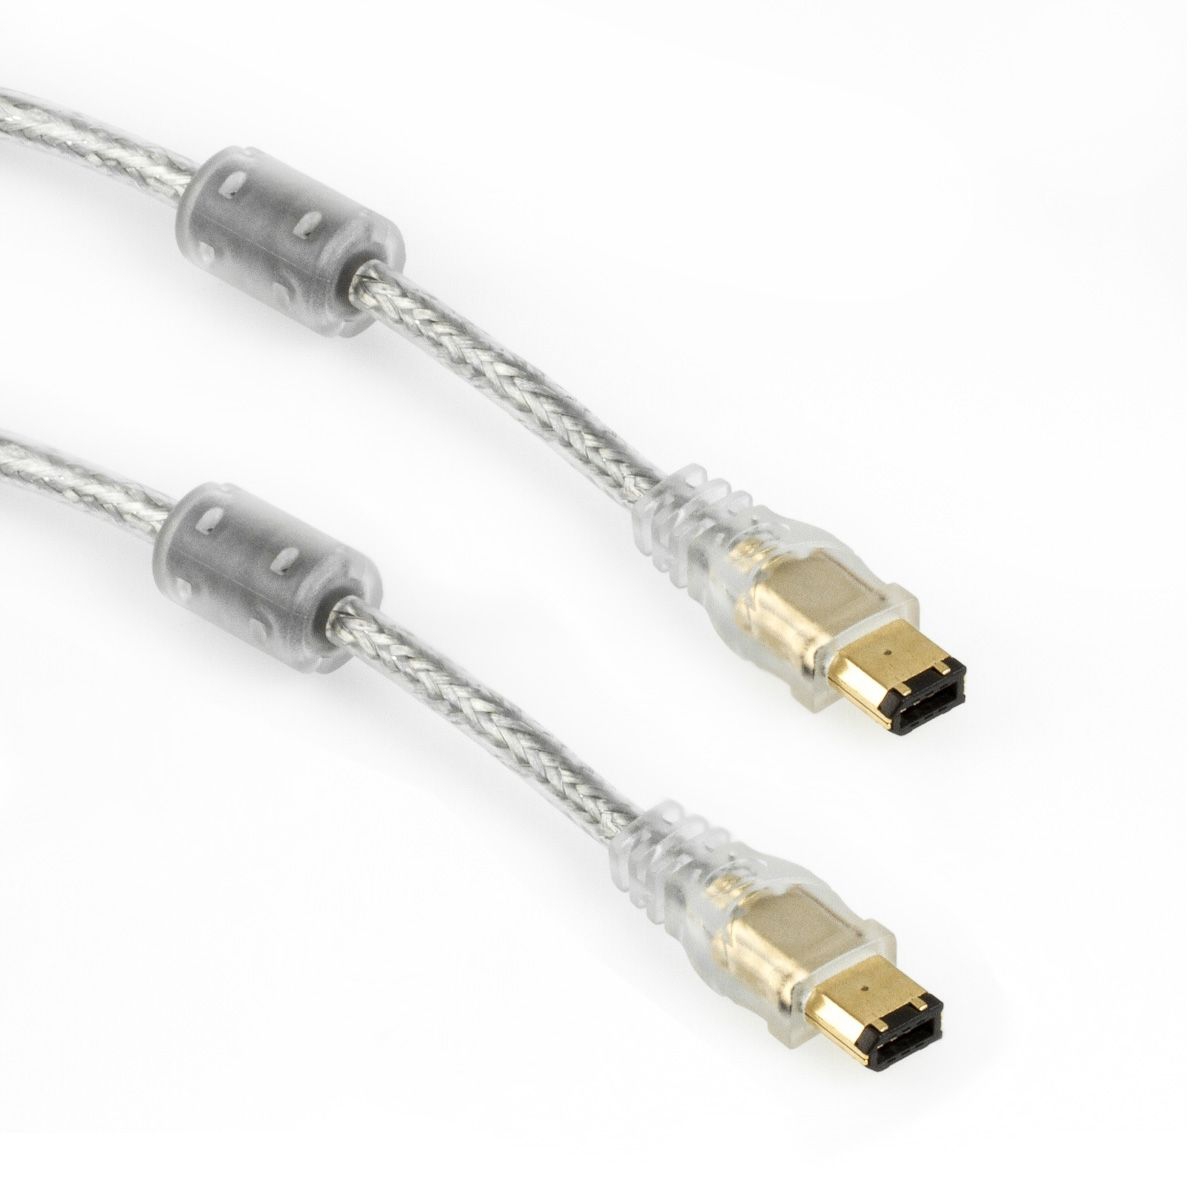 Firewire cable 6-to-6 PREMIUM+ QUALITY with 2 ferrite cores 3m